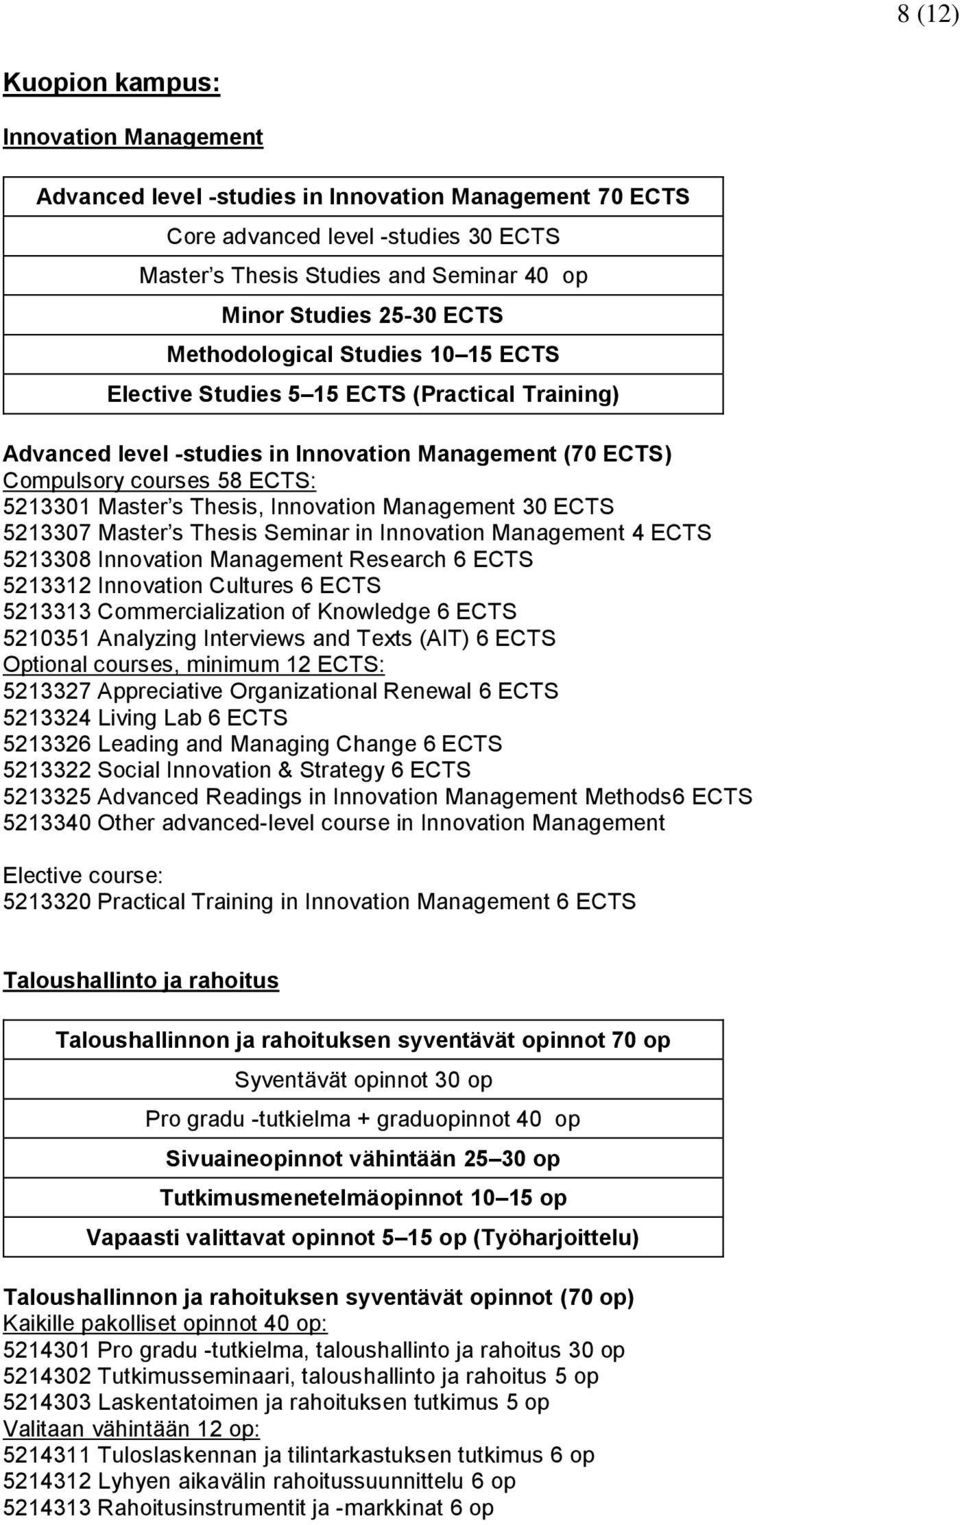 Thesis, Innovation Management 30 ECTS 5213307 Master s Thesis Seminar in Innovation Management 4 ECTS 5213308 Innovation Management Research 6 ECTS 5213312 Innovation Cultures 6 ECTS 5213313